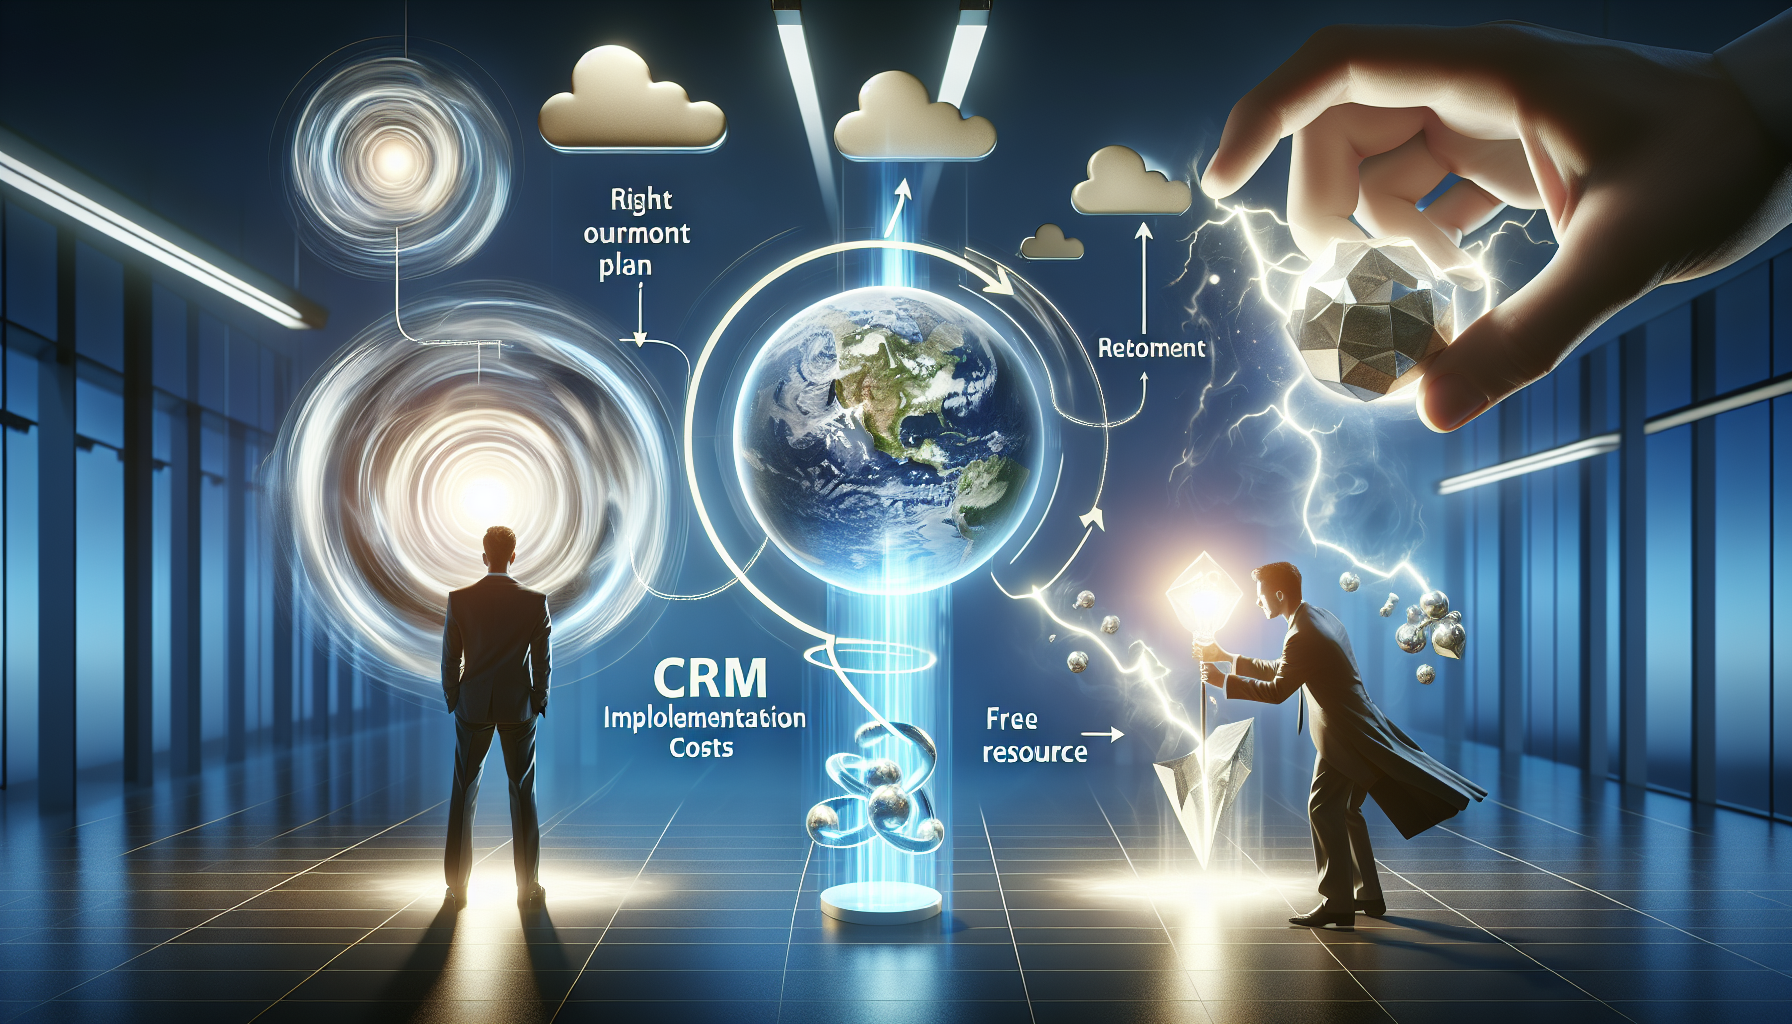 Illustration of reducing CRM implementation costs